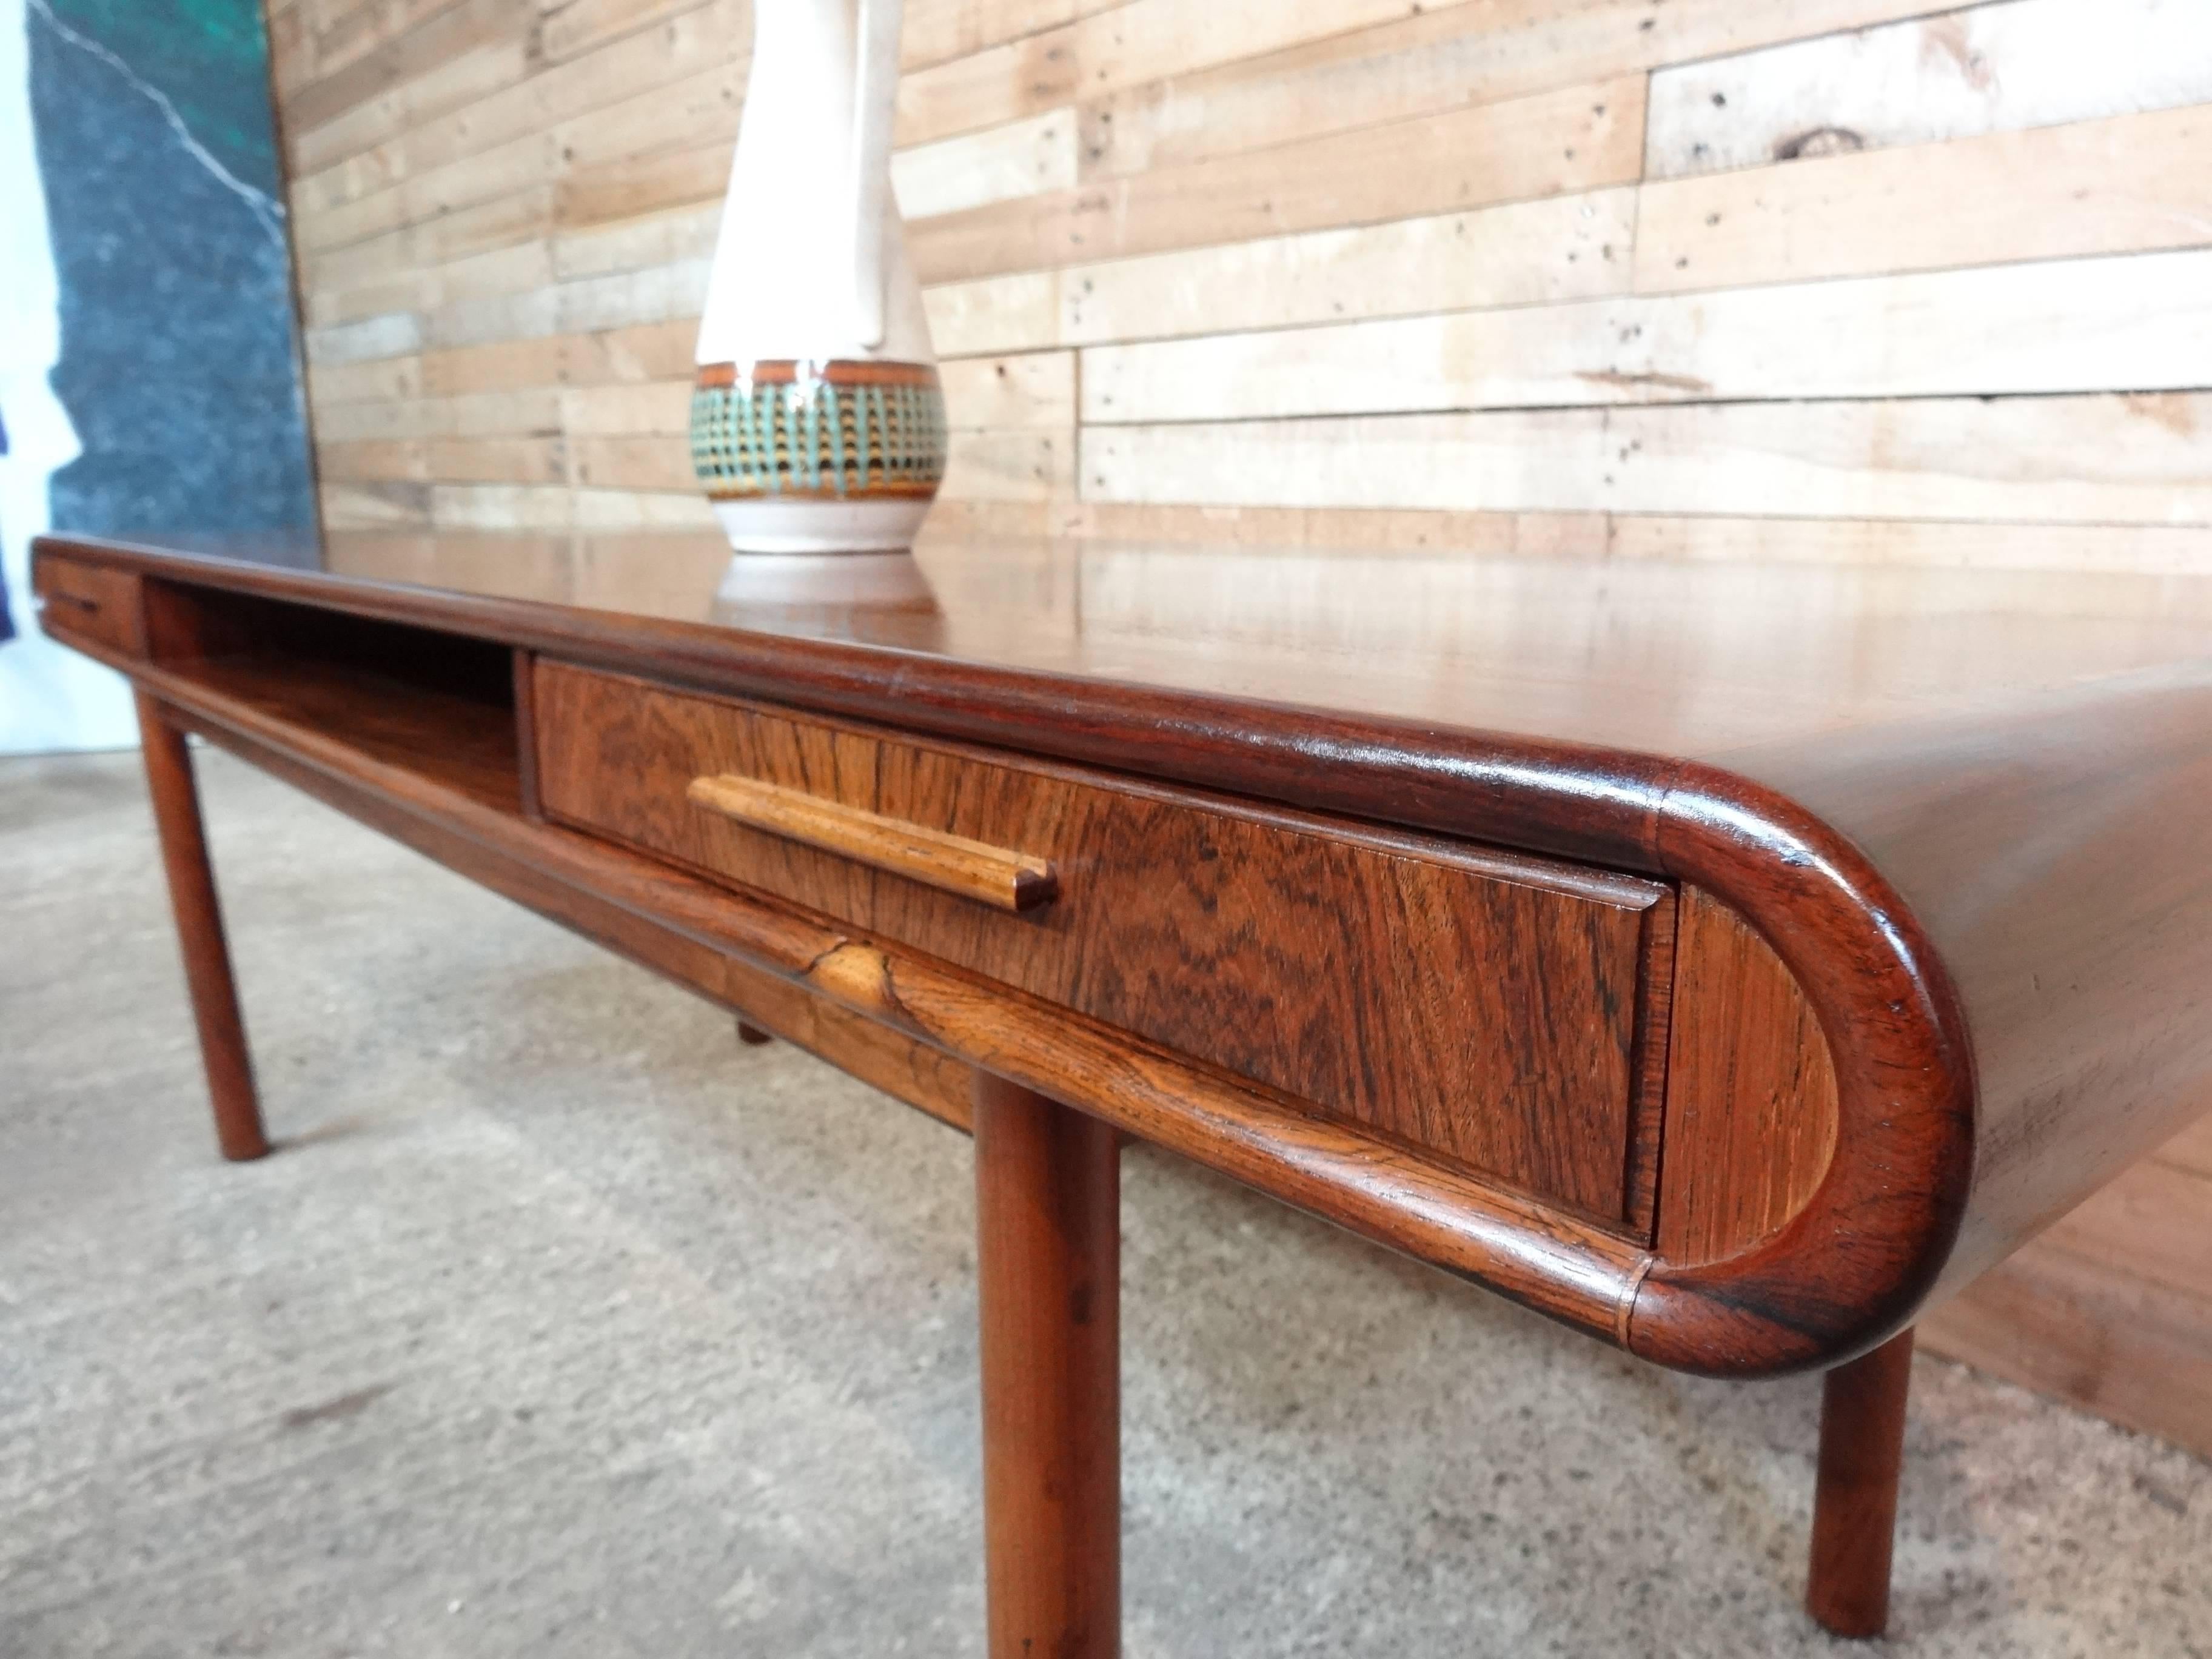 Exquisite Danish 1960s retro rosewood coffee table with two drawers.

I have researched this particular table for the last couple of weeks and have not found another table like it on the internet or in any trade / designer books.

Probably one